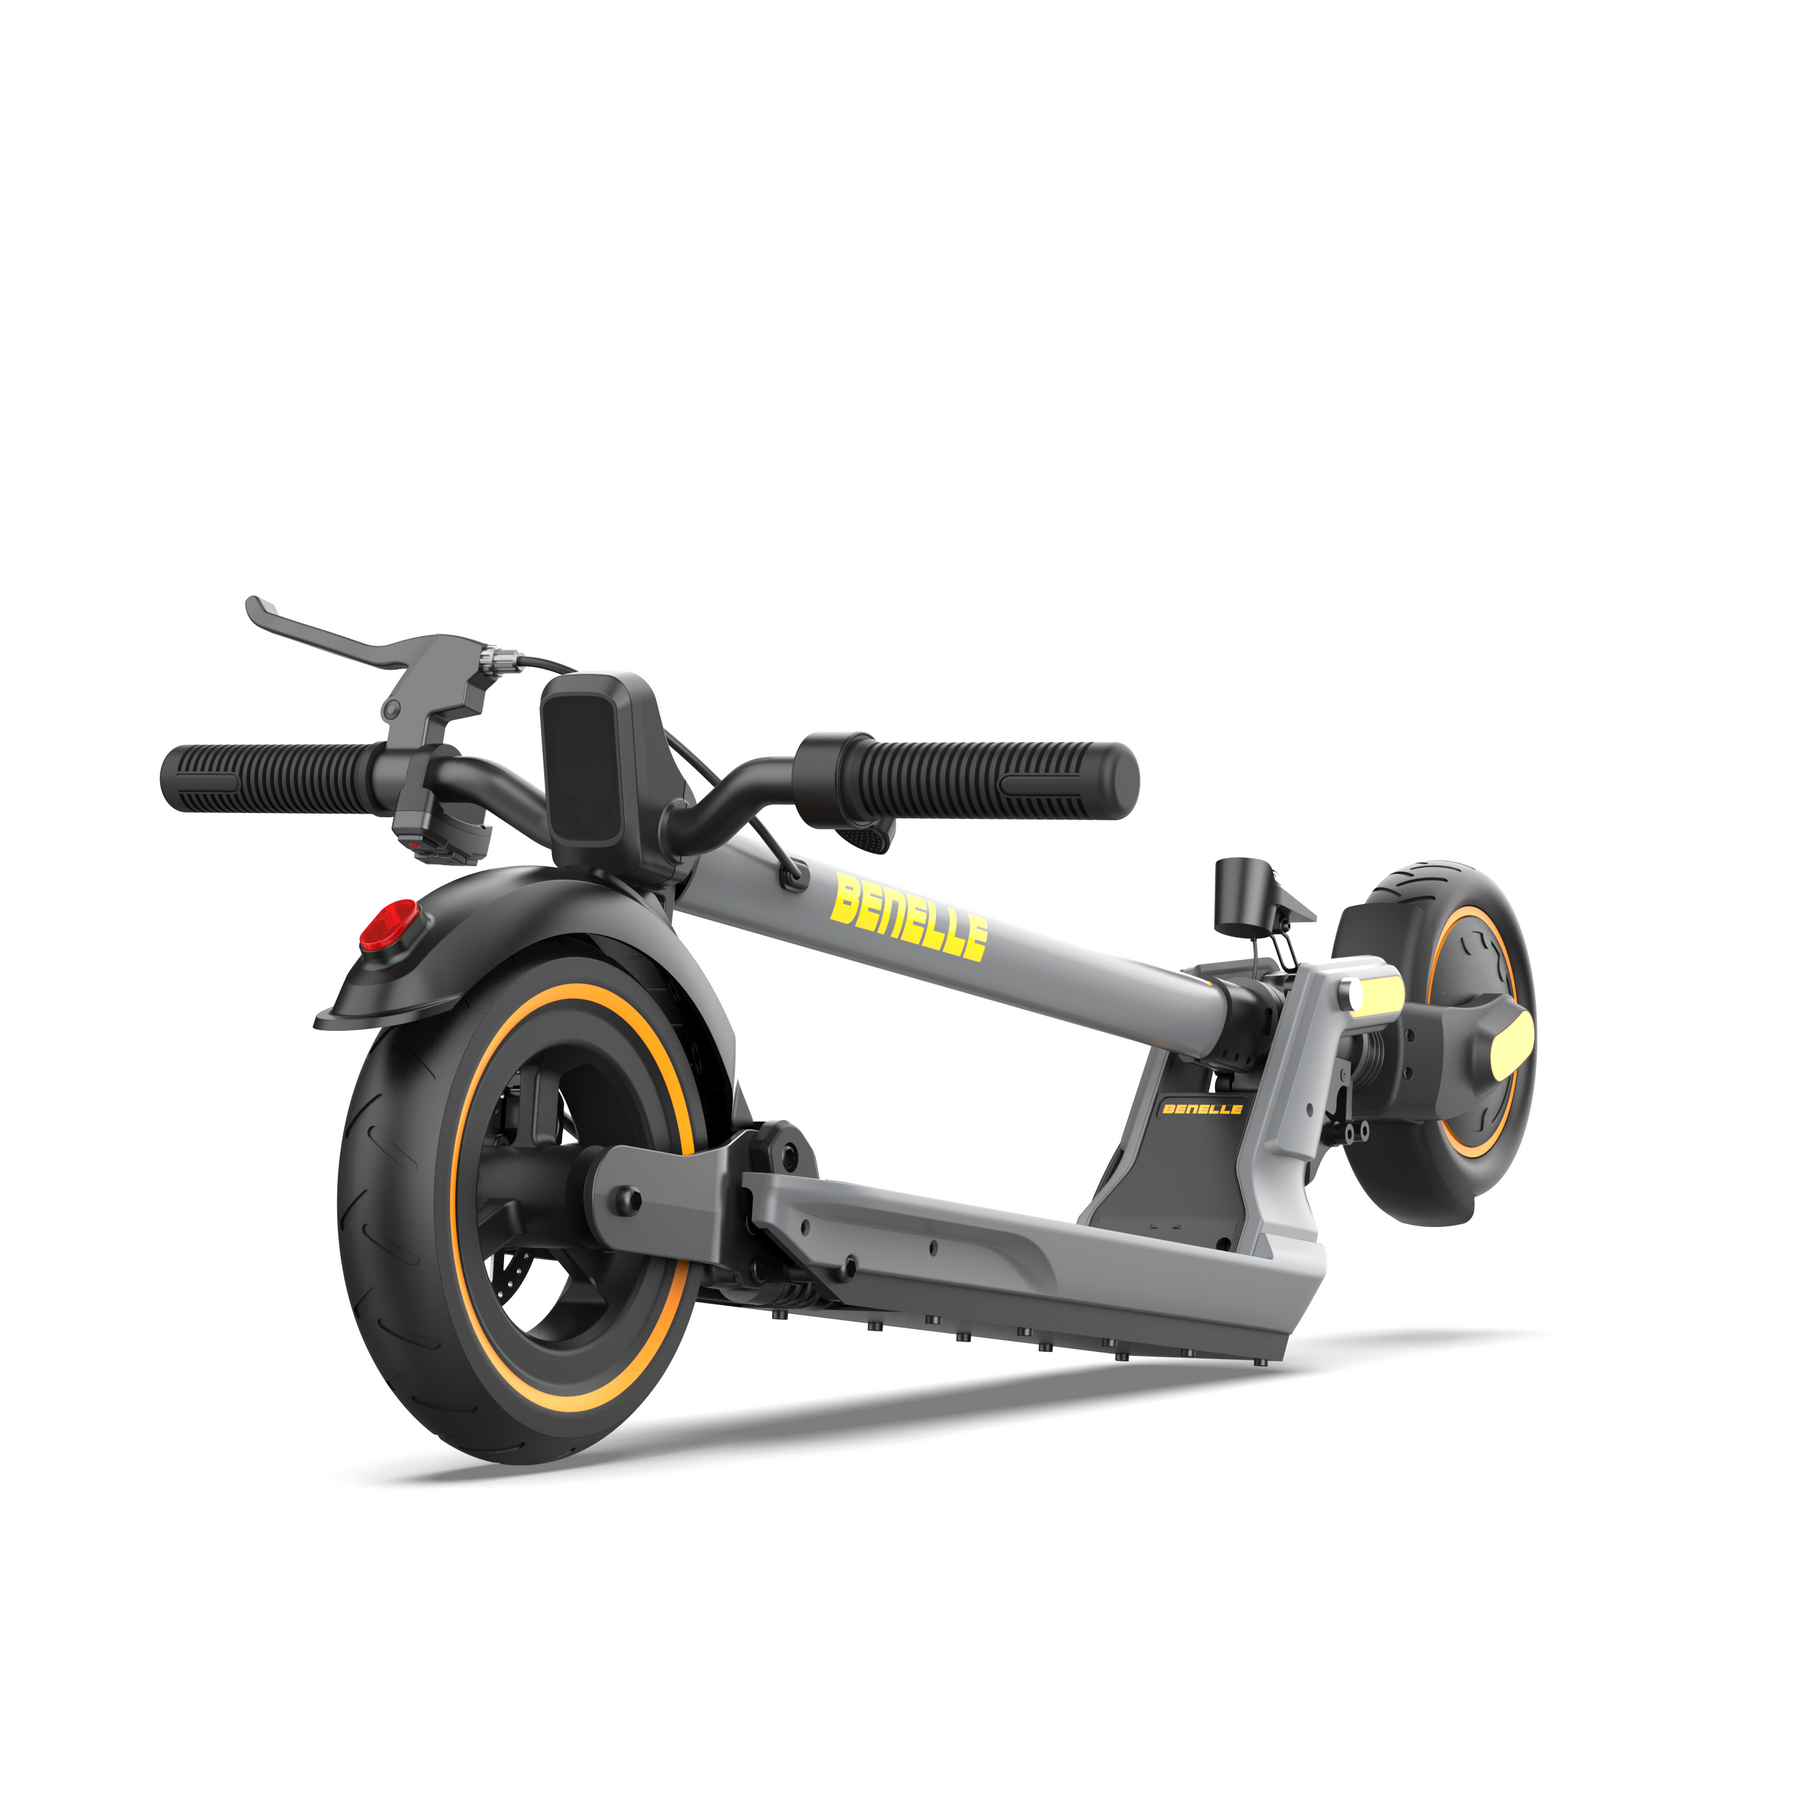 Benelle S350L Electric Scooter